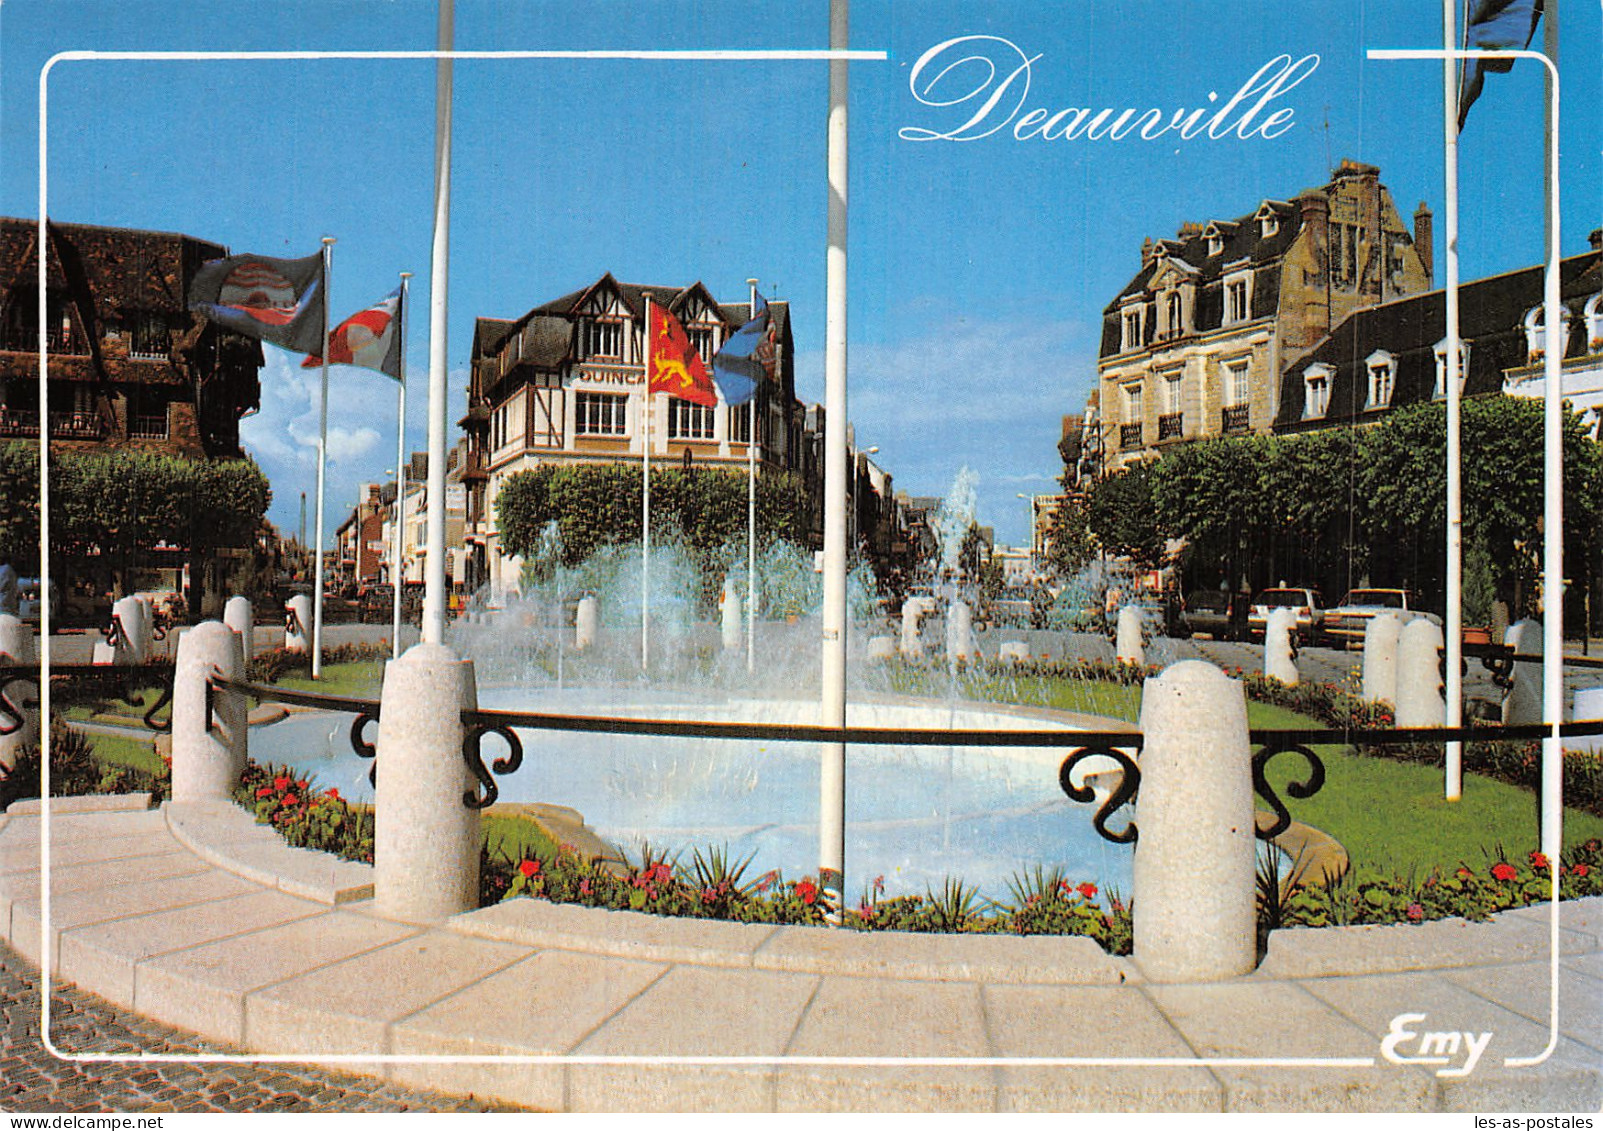 14 DEAUVILLE PLACE MORNY - Deauville